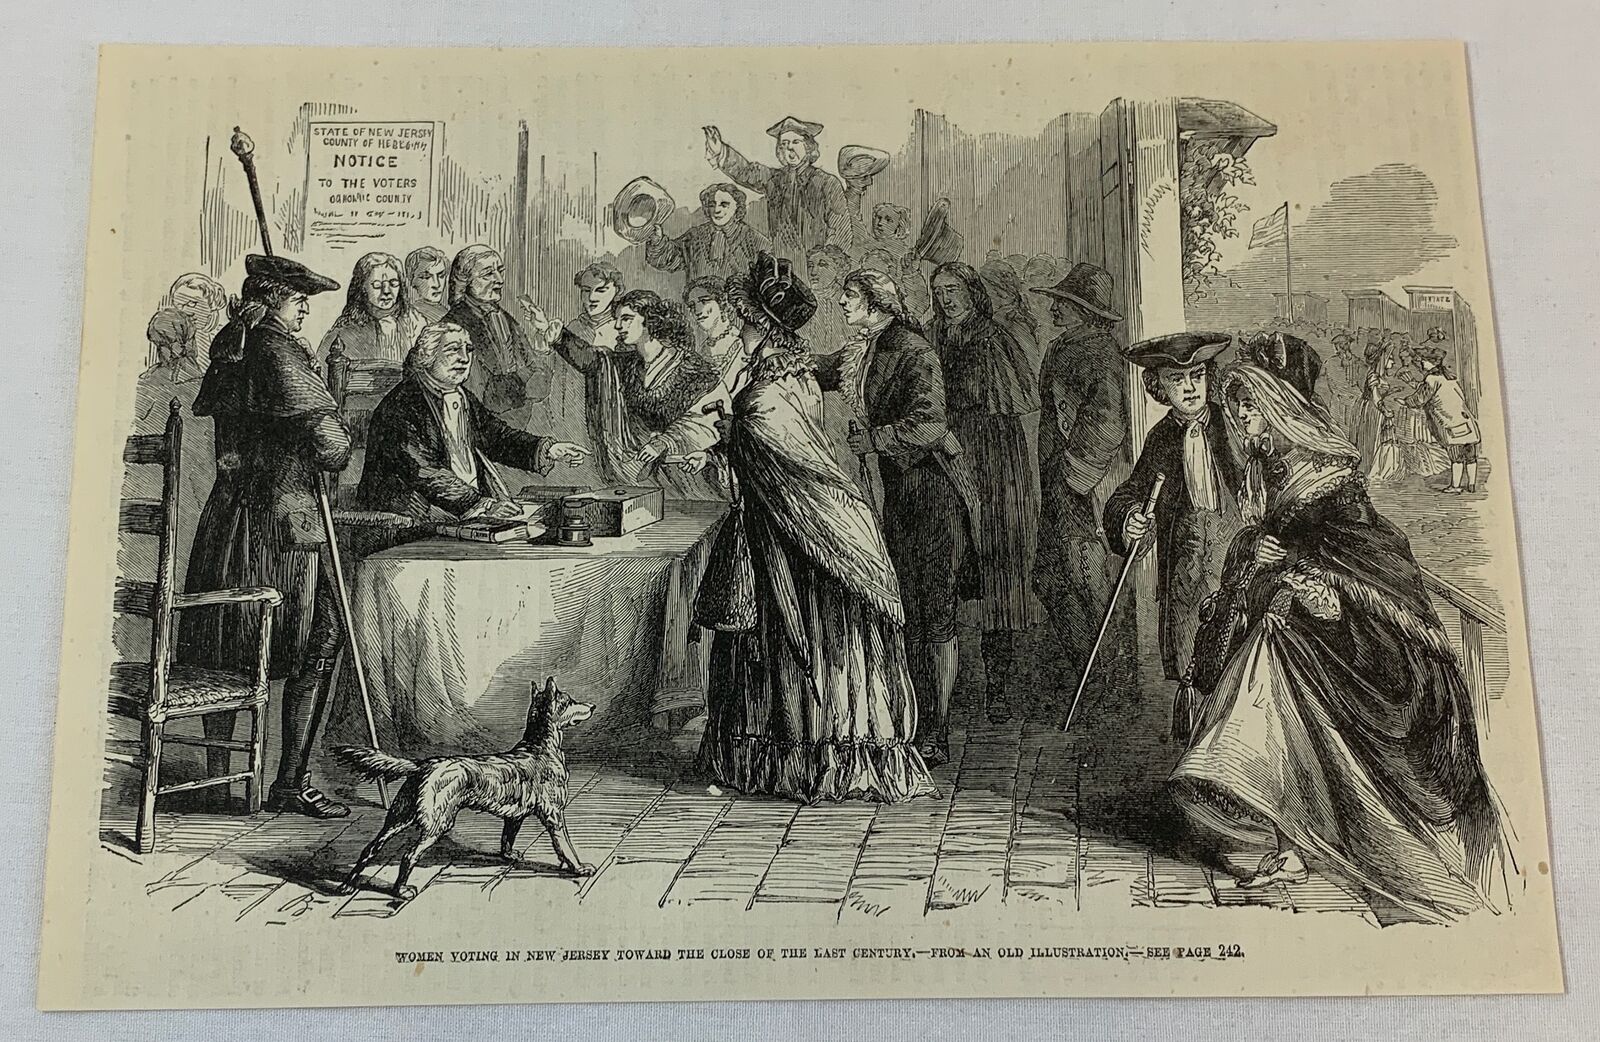 1877 magazine engraving~ WOMEN VOTING IN NEW JERSEY suffrage in the late 1700s